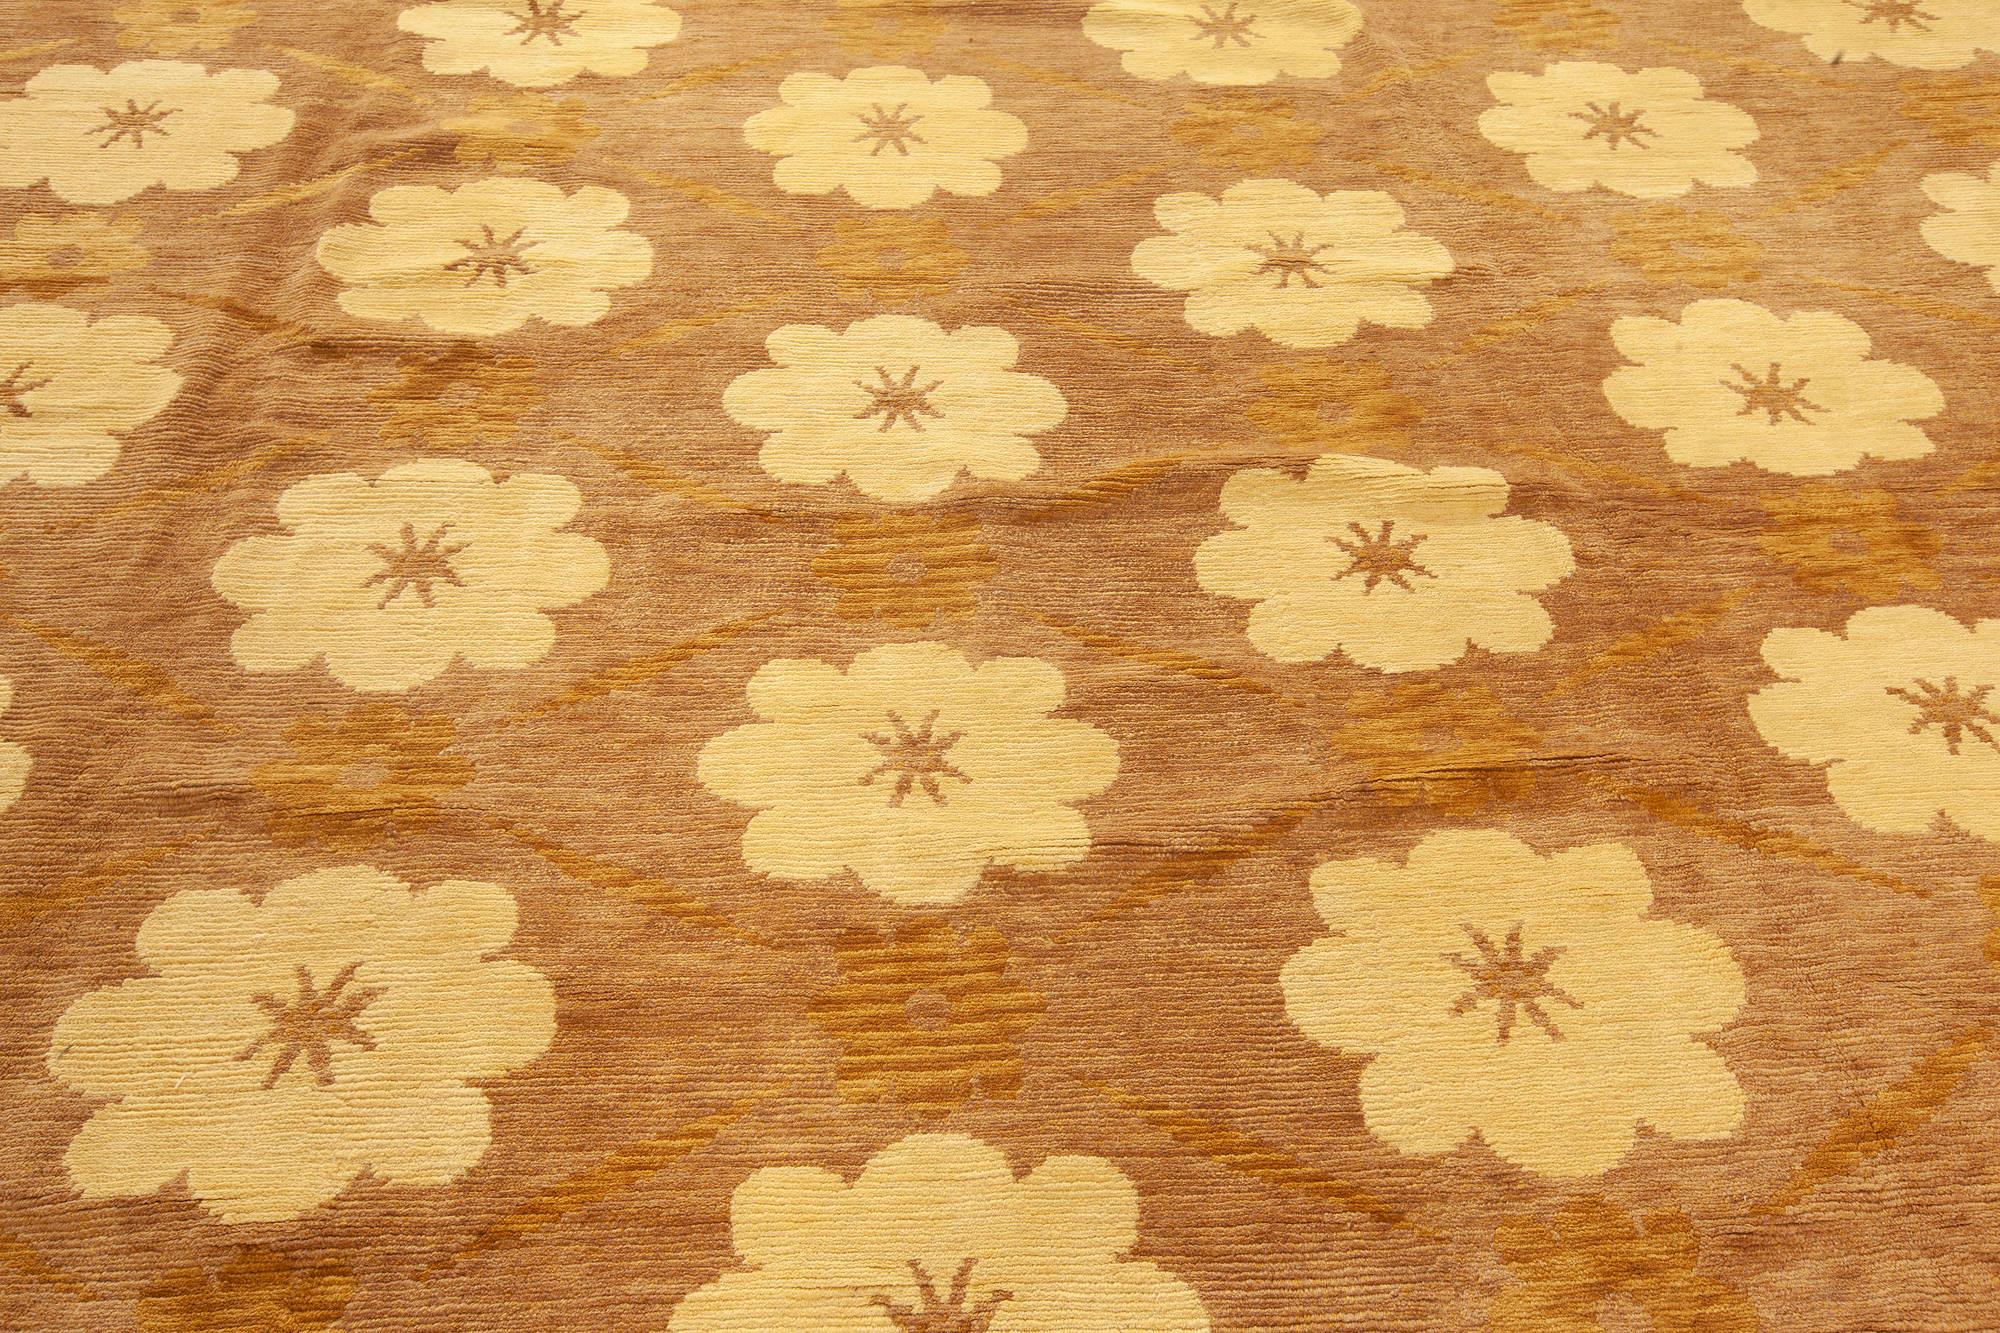 Transitional rug of classic inspiration by Doris Leslie Blau
Color: beige, brown, yellow
Material: silk, wool
A new hand-knotted cut-pile area rug inspired by a traditional floral style, alternating rows of stylized yellow and brown blossoms on a